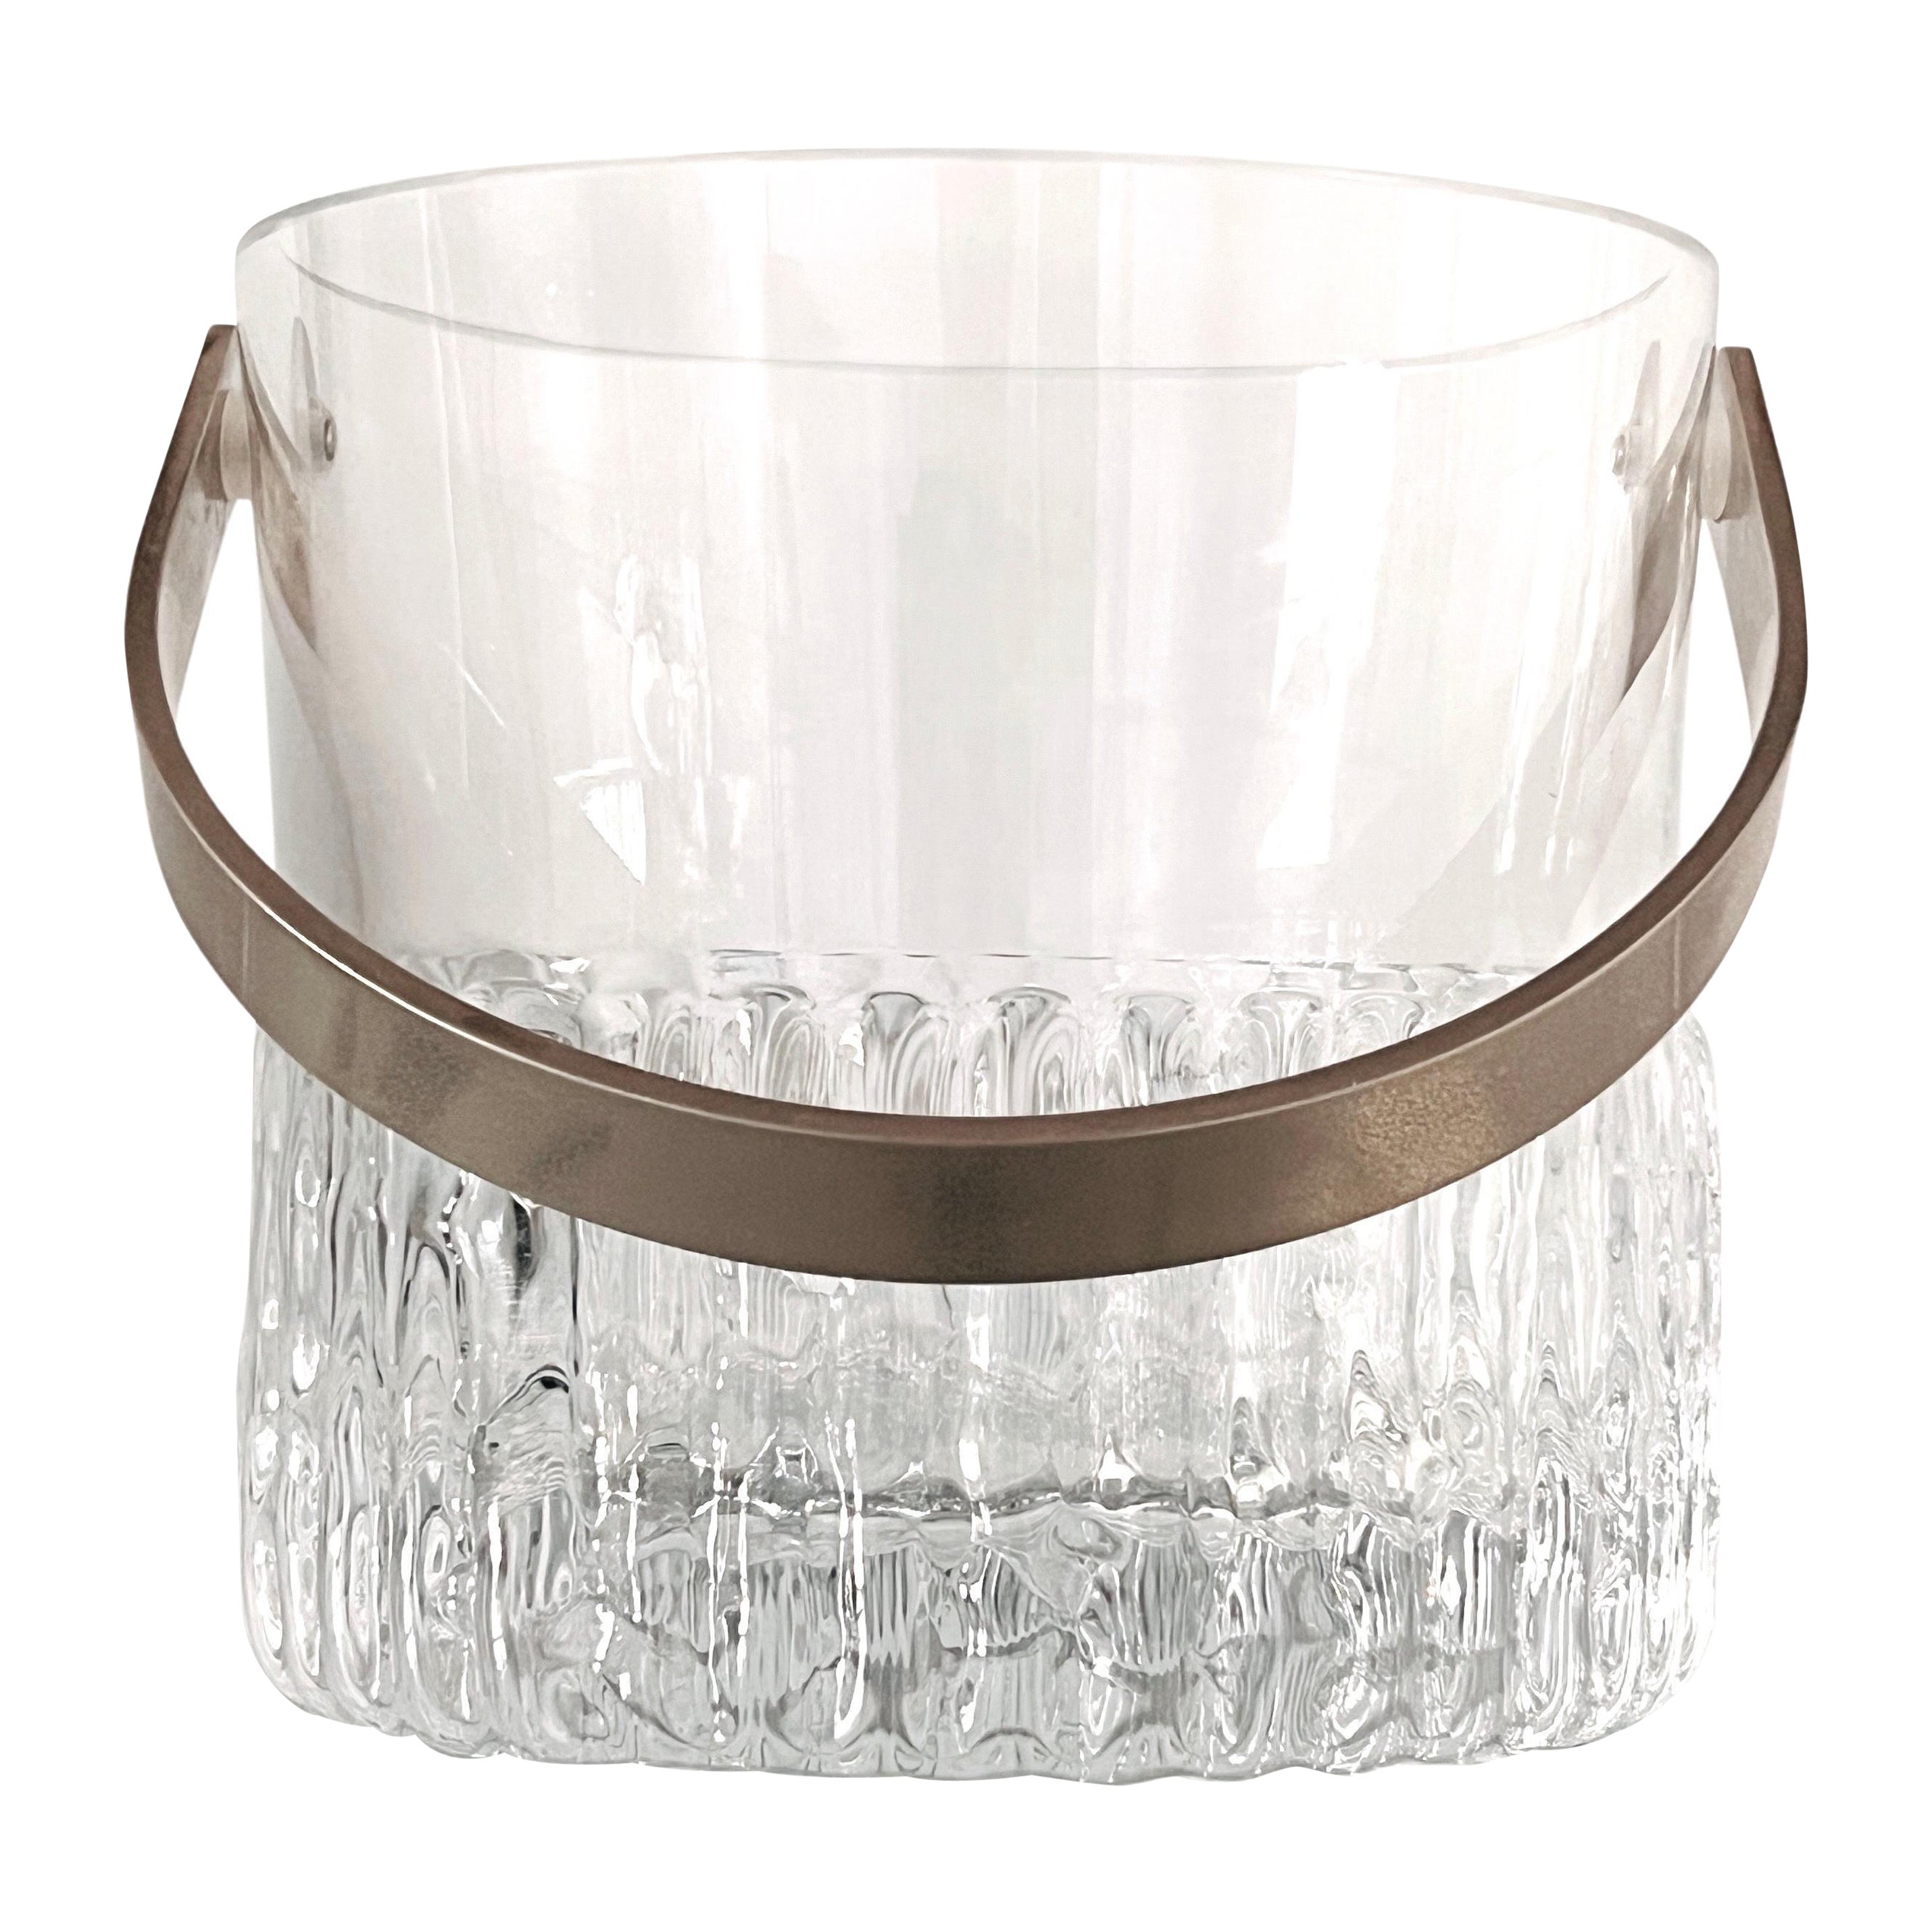 Mid-Century Modern Crystal Ice Bucket with Textured Glass, France, c. 1970s For Sale